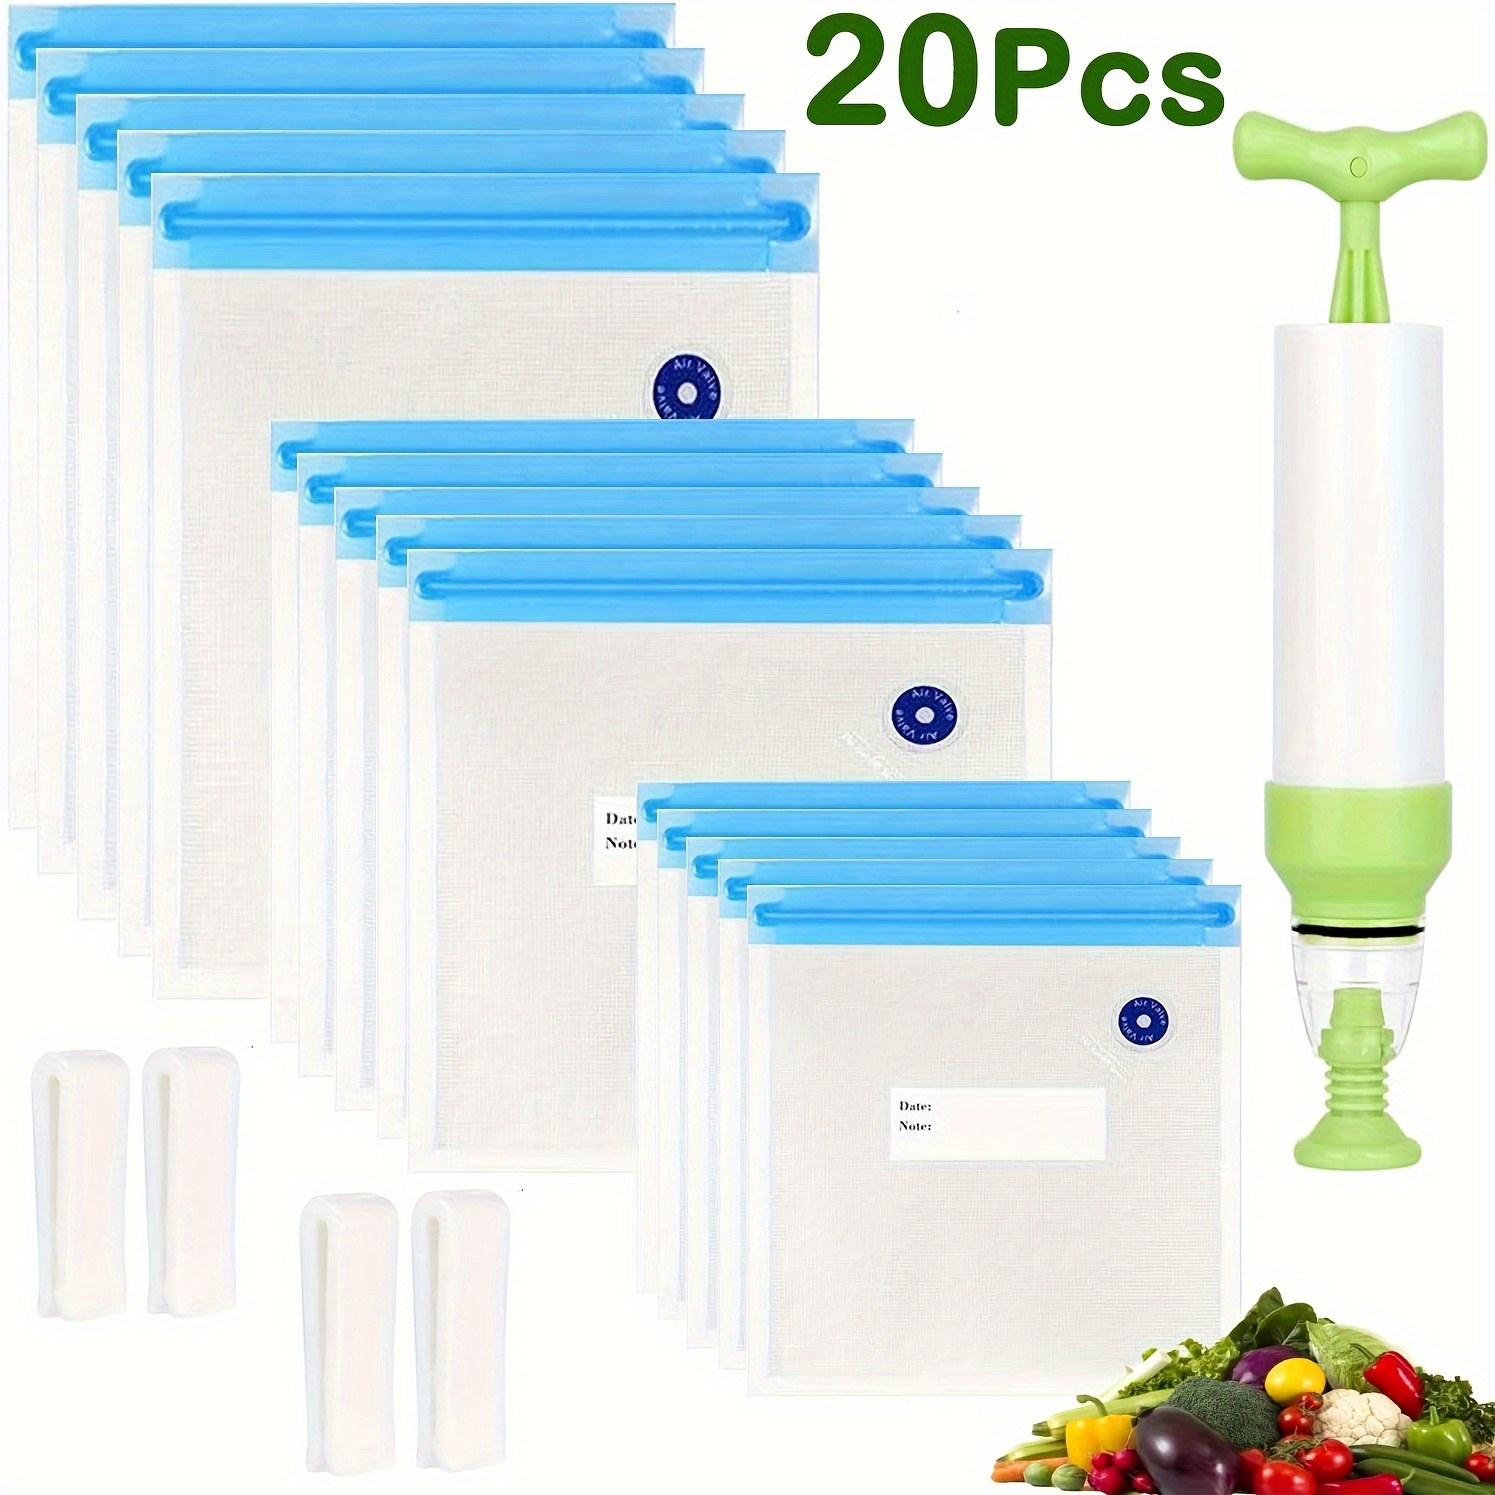 

20pcs Reusable Vacuum Food Storage Bags For Food Storage & Sous Vide Cooking, 3 Sizes Food Vacuum Zipper Bags With 4 Sealing Clips, Hand Pump